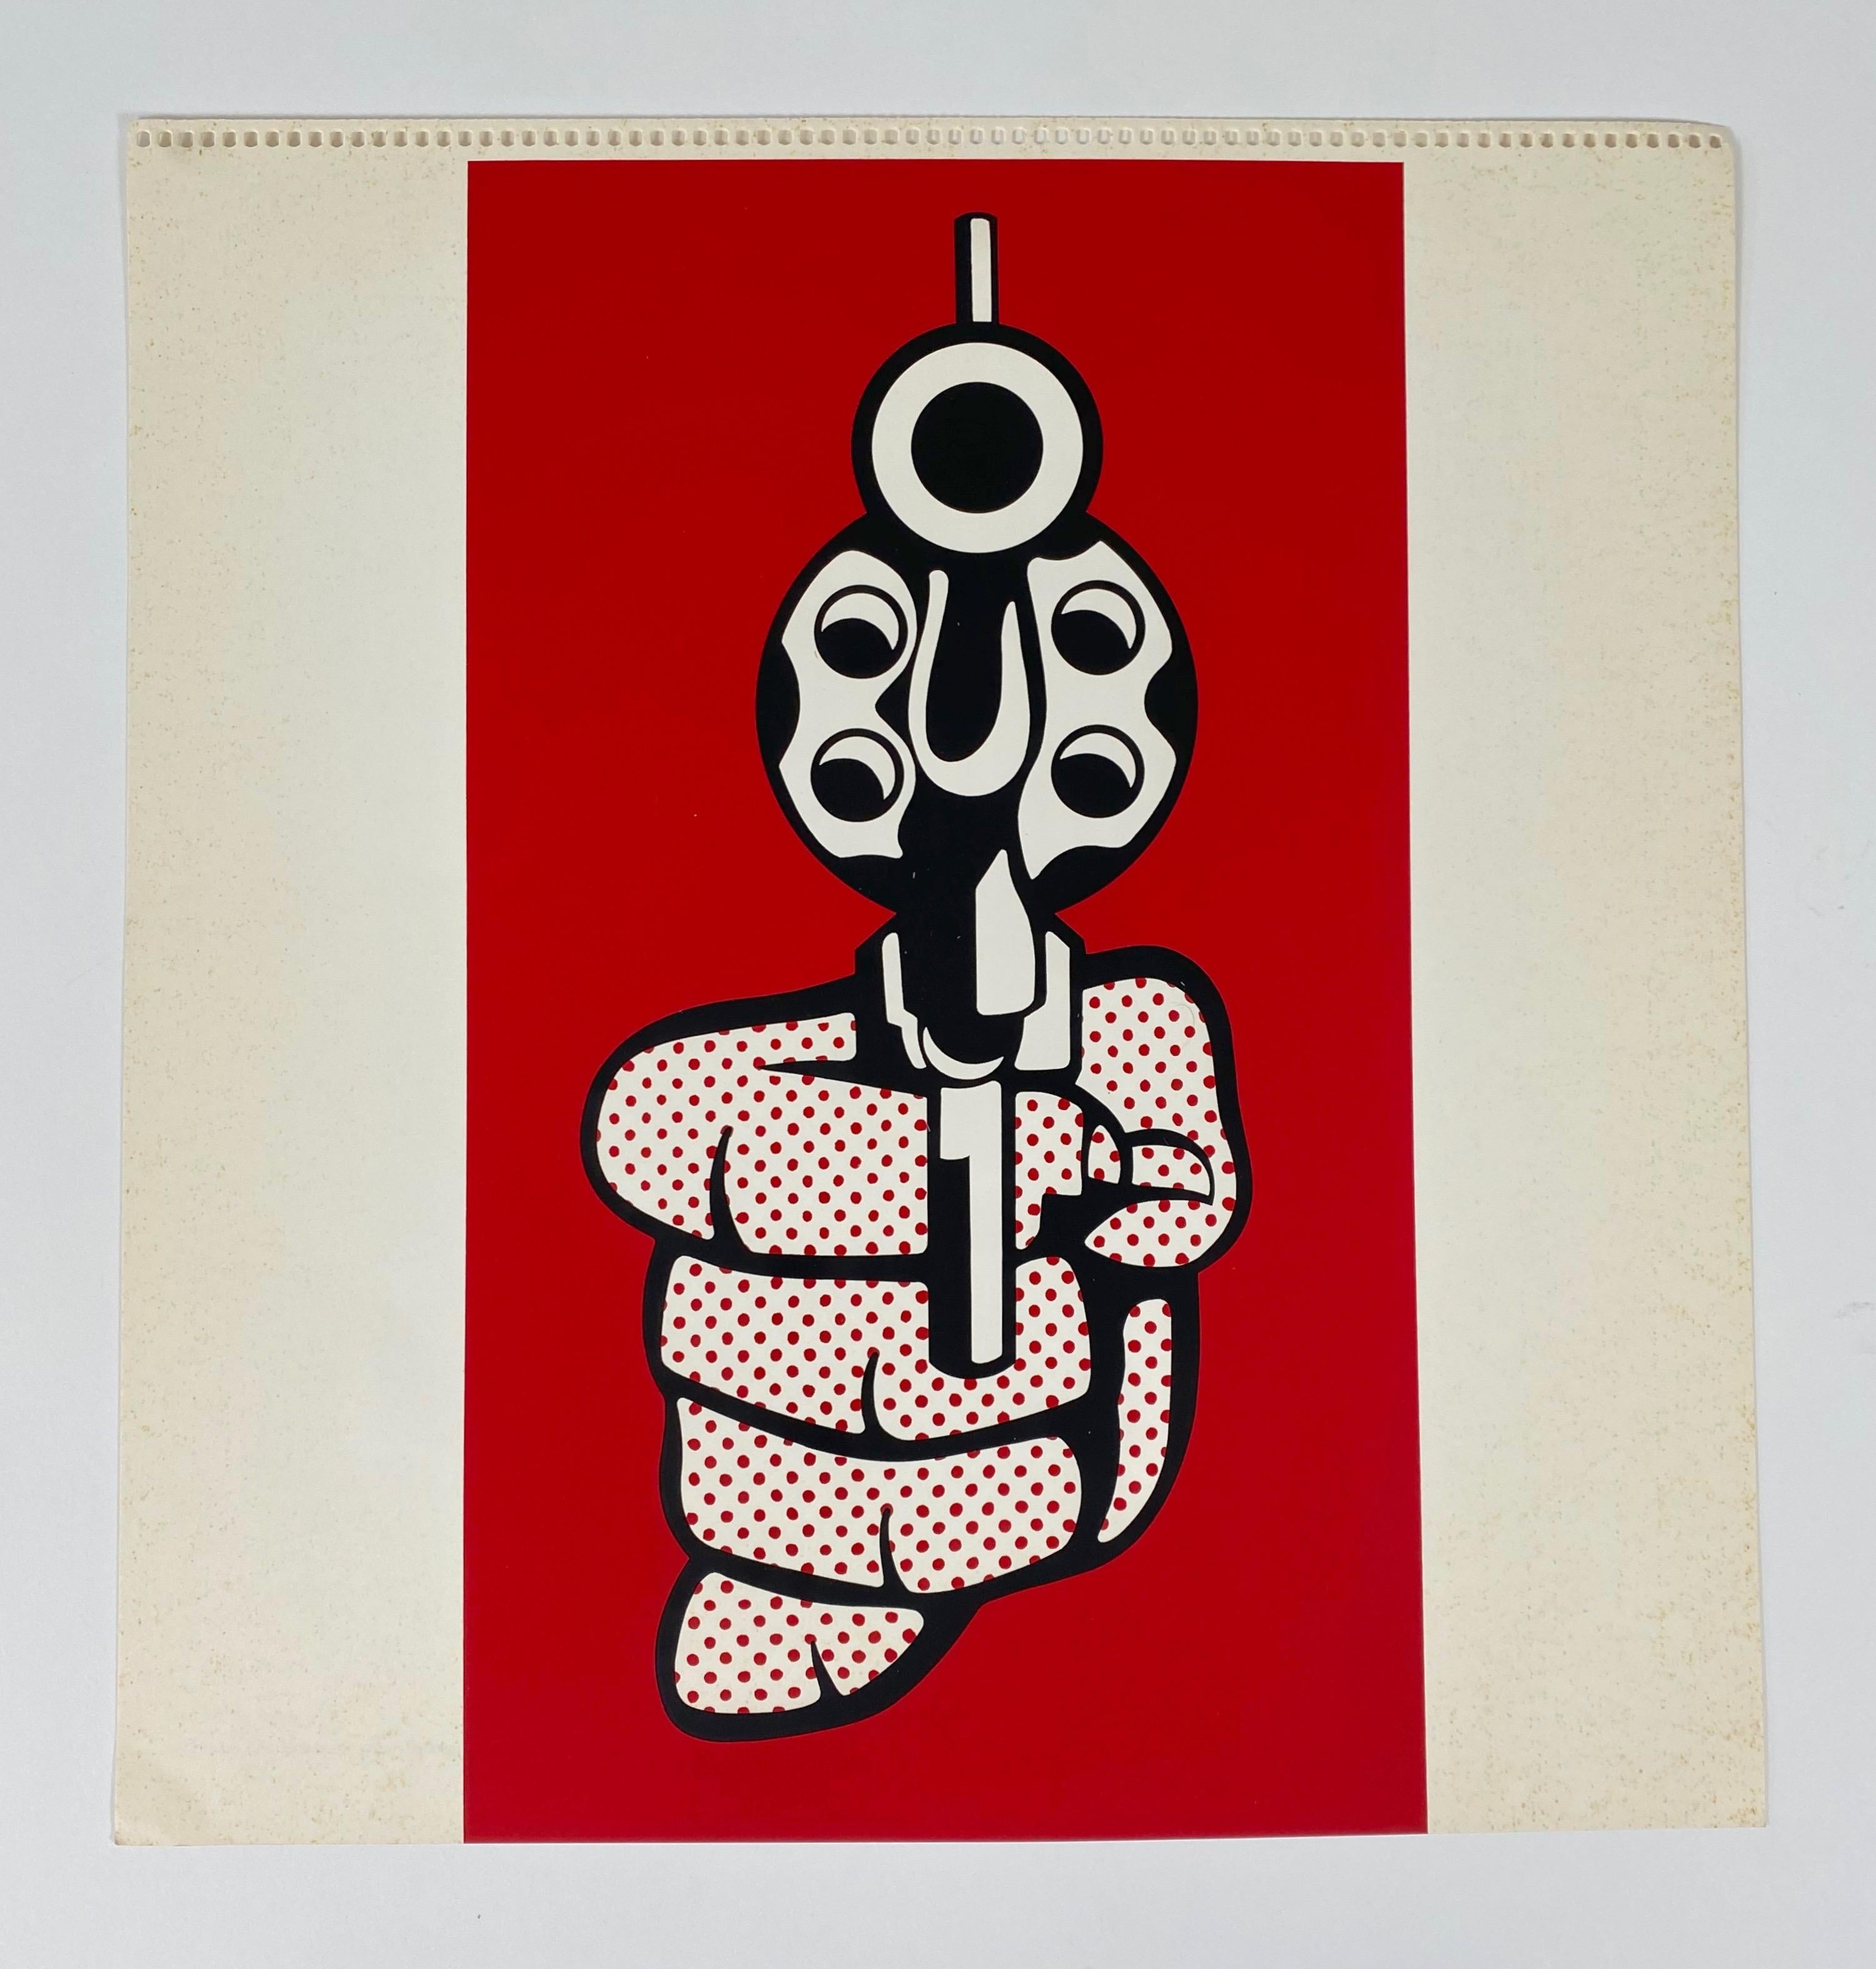 Five silk screen pop art prints by Domberger KG Stuttgart, West Germany circa 1968 for Multiples Inc. NY, NY. 1969. These were a limited run edition for Multiples Inc., the five artists are Jim Dine, Nicholas Krushenick, Robert Indiana, Tom